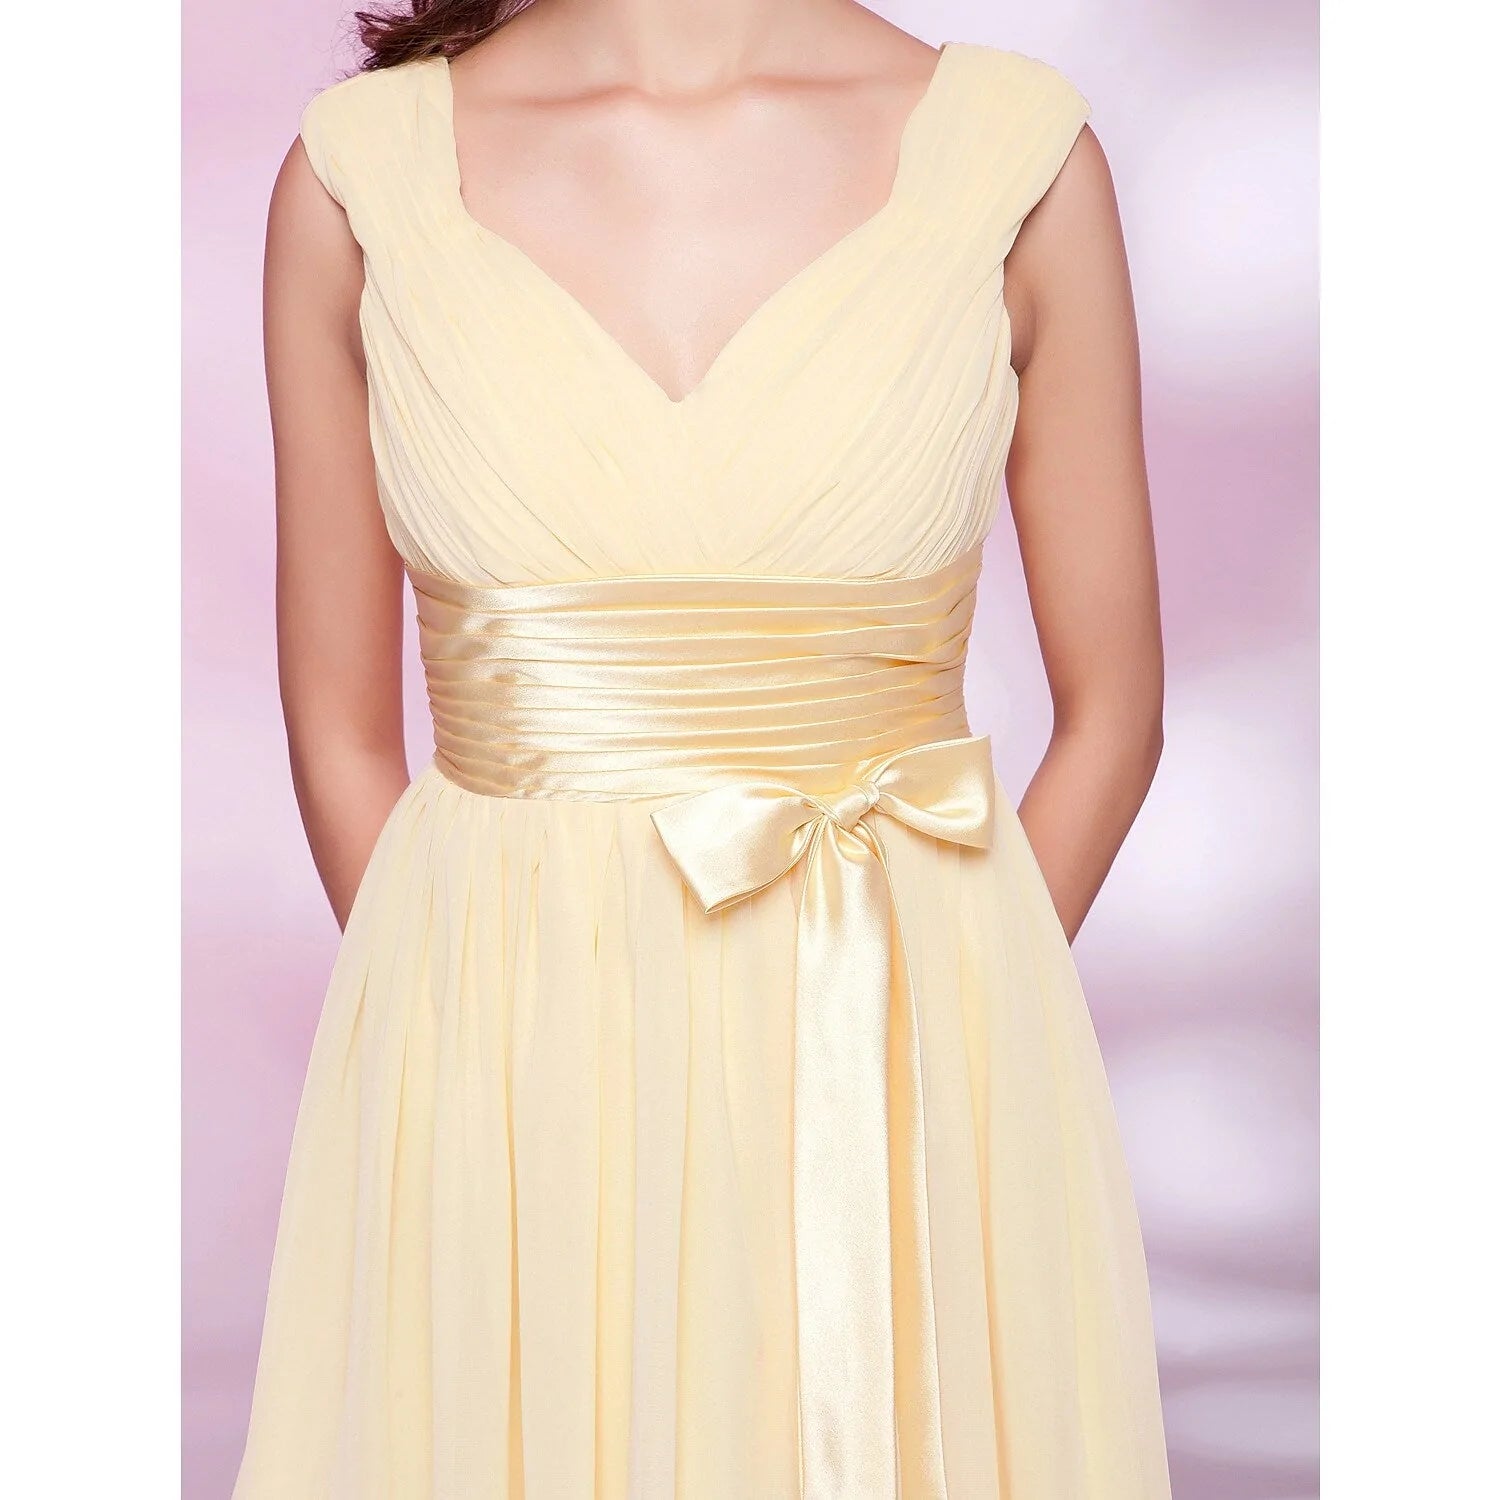 Ball Gown / A-Line Bridesmaid Dress V Neck Sleeveless Knee Length Chiffon with Sash / Ribbon / Bow(s) / Ruched